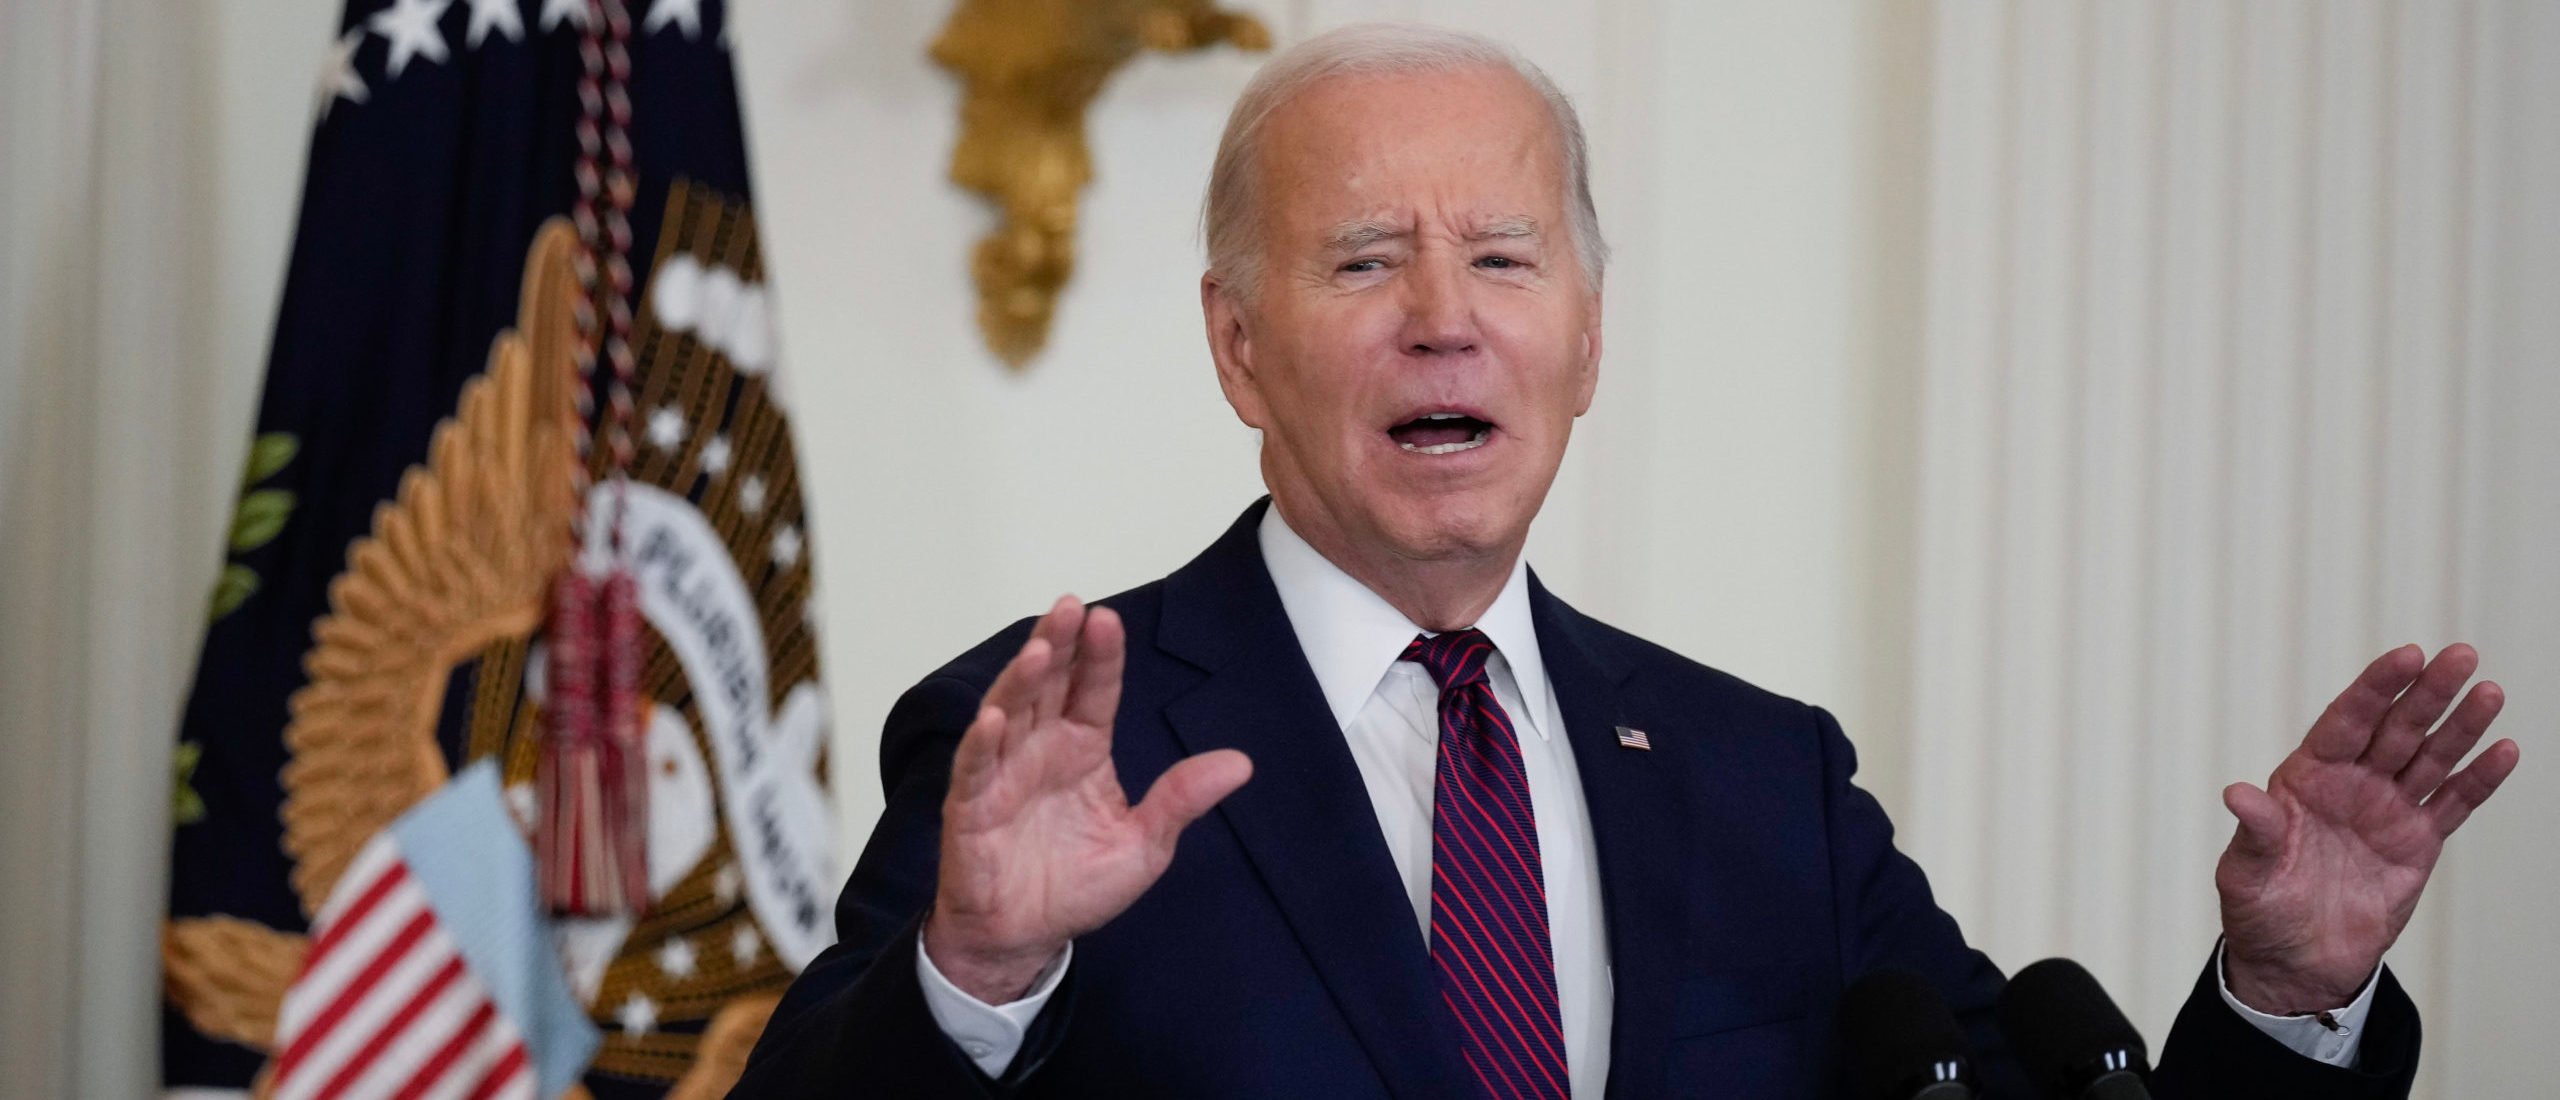 Biden Reveals Whether He Thinks Two State Solution Is Currently Possible After First Call With Netanyahu In Weeks